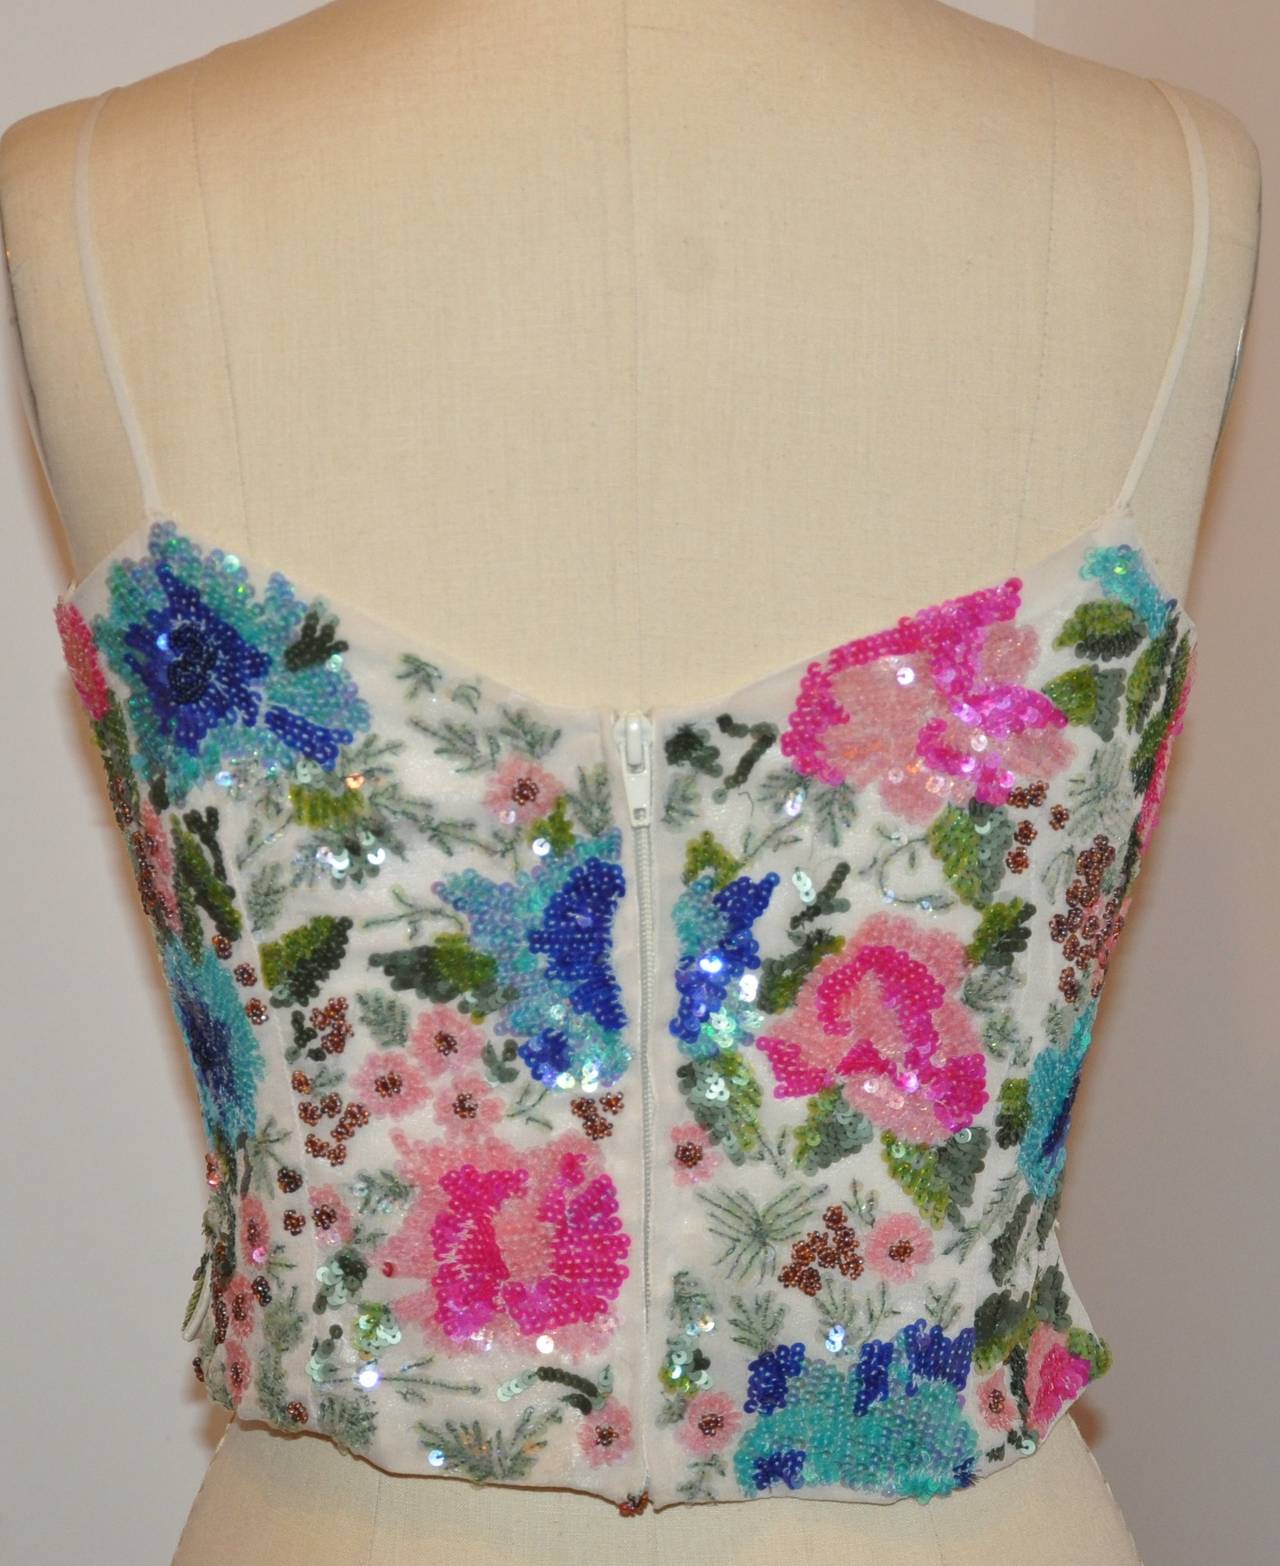 Shanghai Tang Multicolored Multi-Sequin & Beaded Floral Evening Top 1